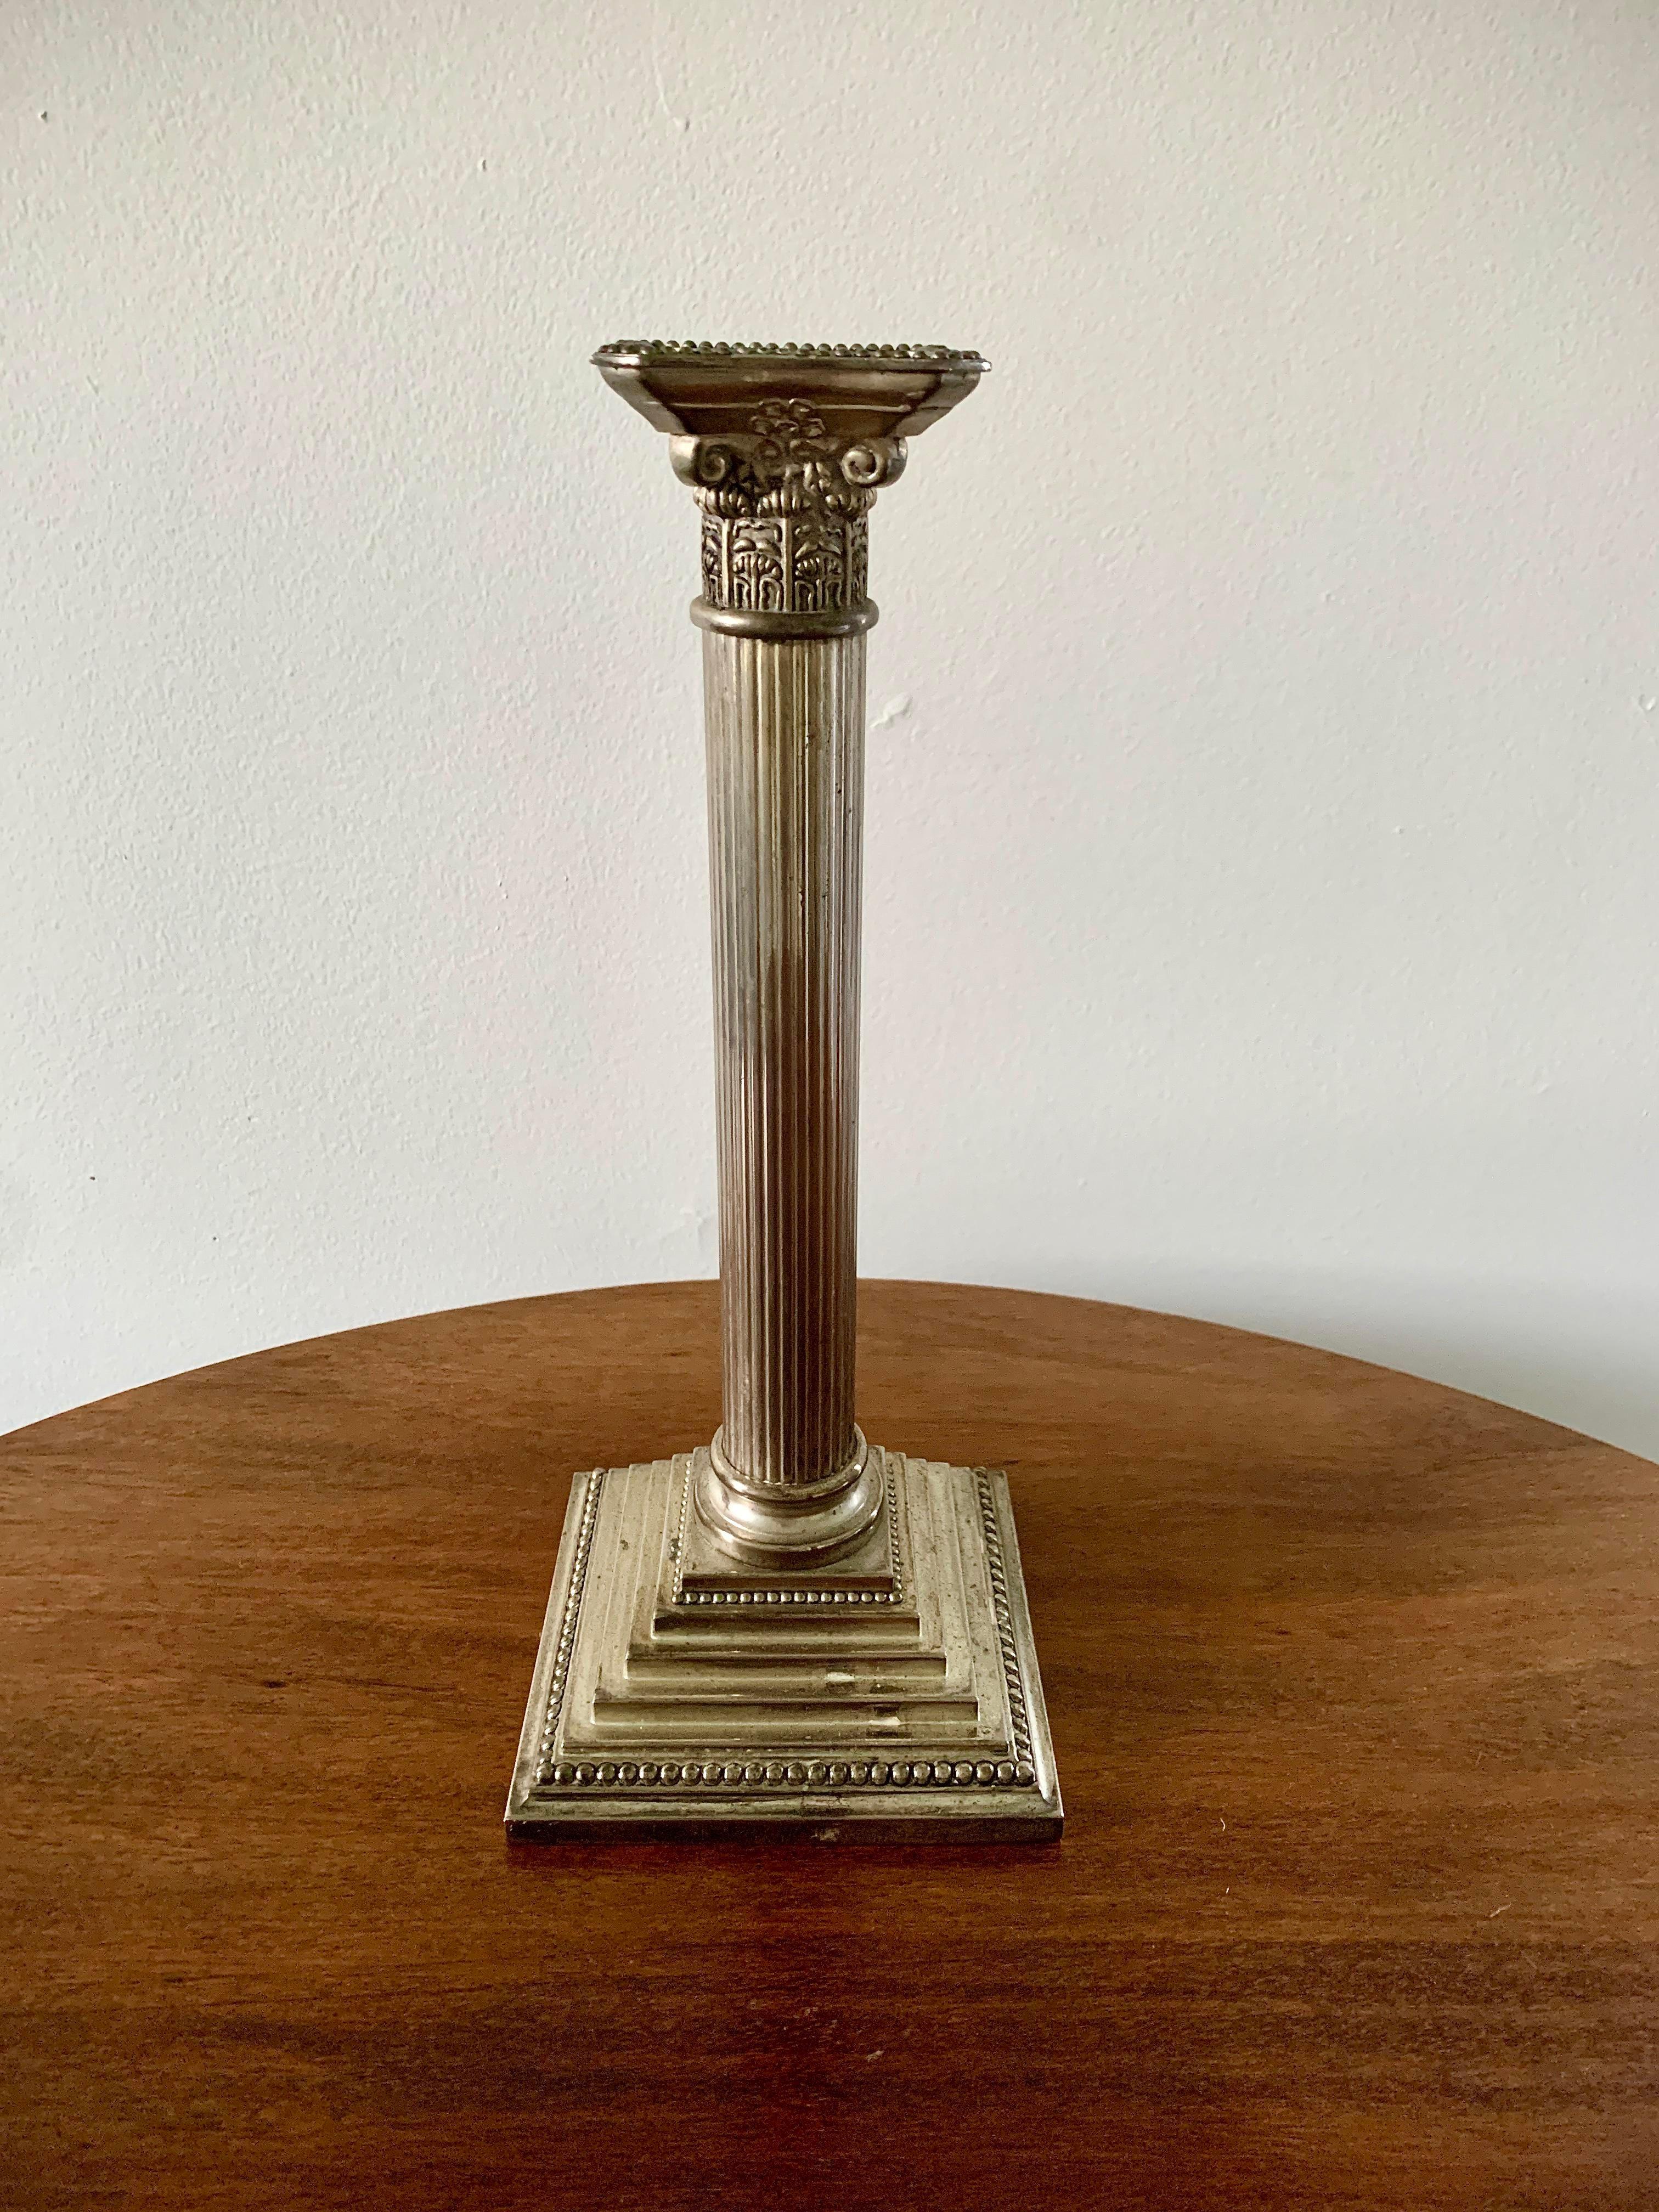 A gorgeous Neoclassical style silver plate corinthian column candle holder

Circa Mid-20th Century

Measures: 5